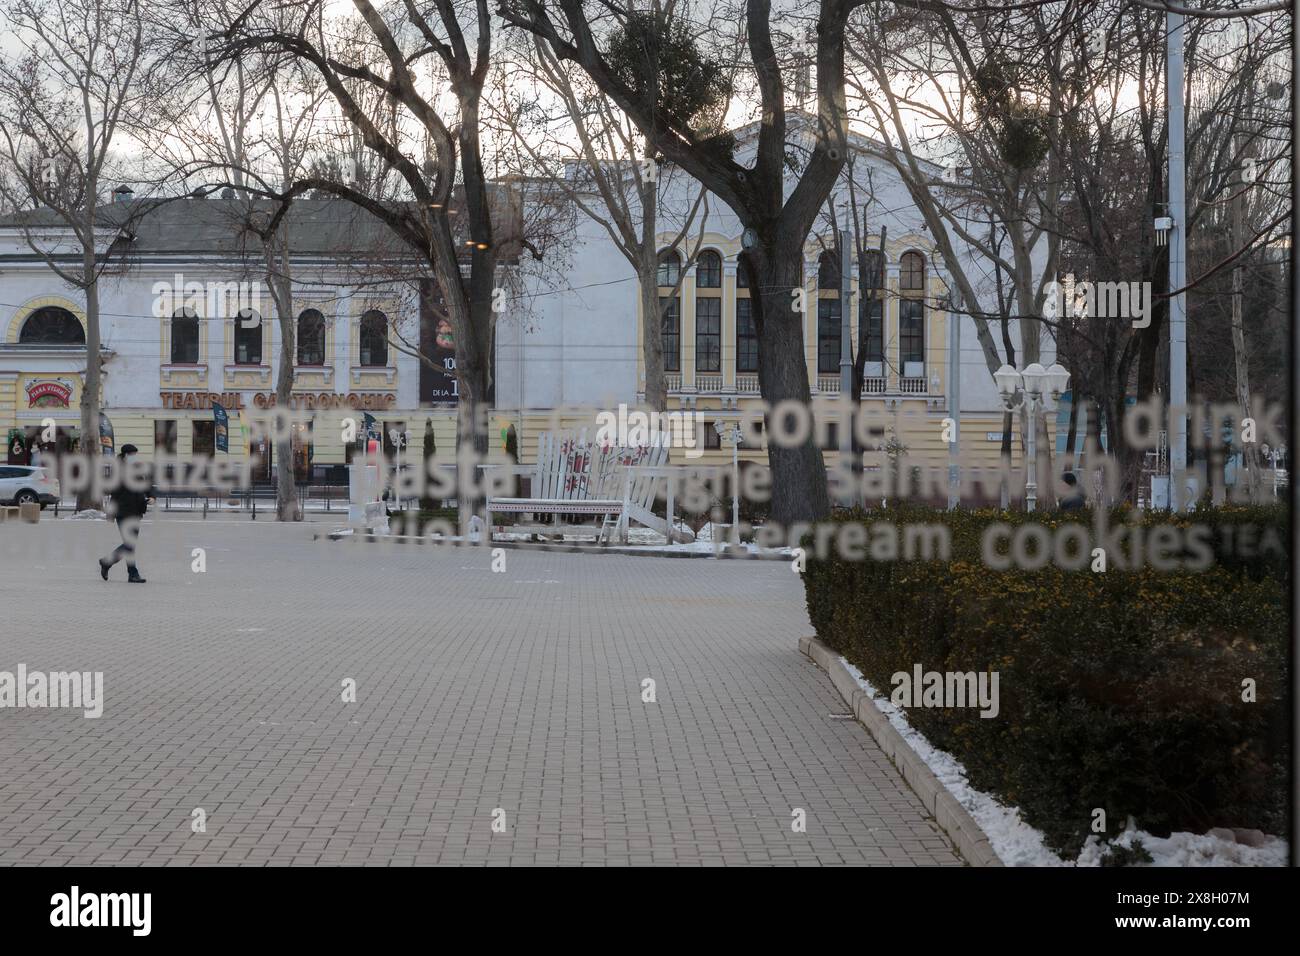 Square in front of the Opera and Ballet Theater. Bd. Stefan cel Mare si Sfint. Chisinau, Republic of Moldova. February 16, 2021, at 16.50 pm. Stock Photo